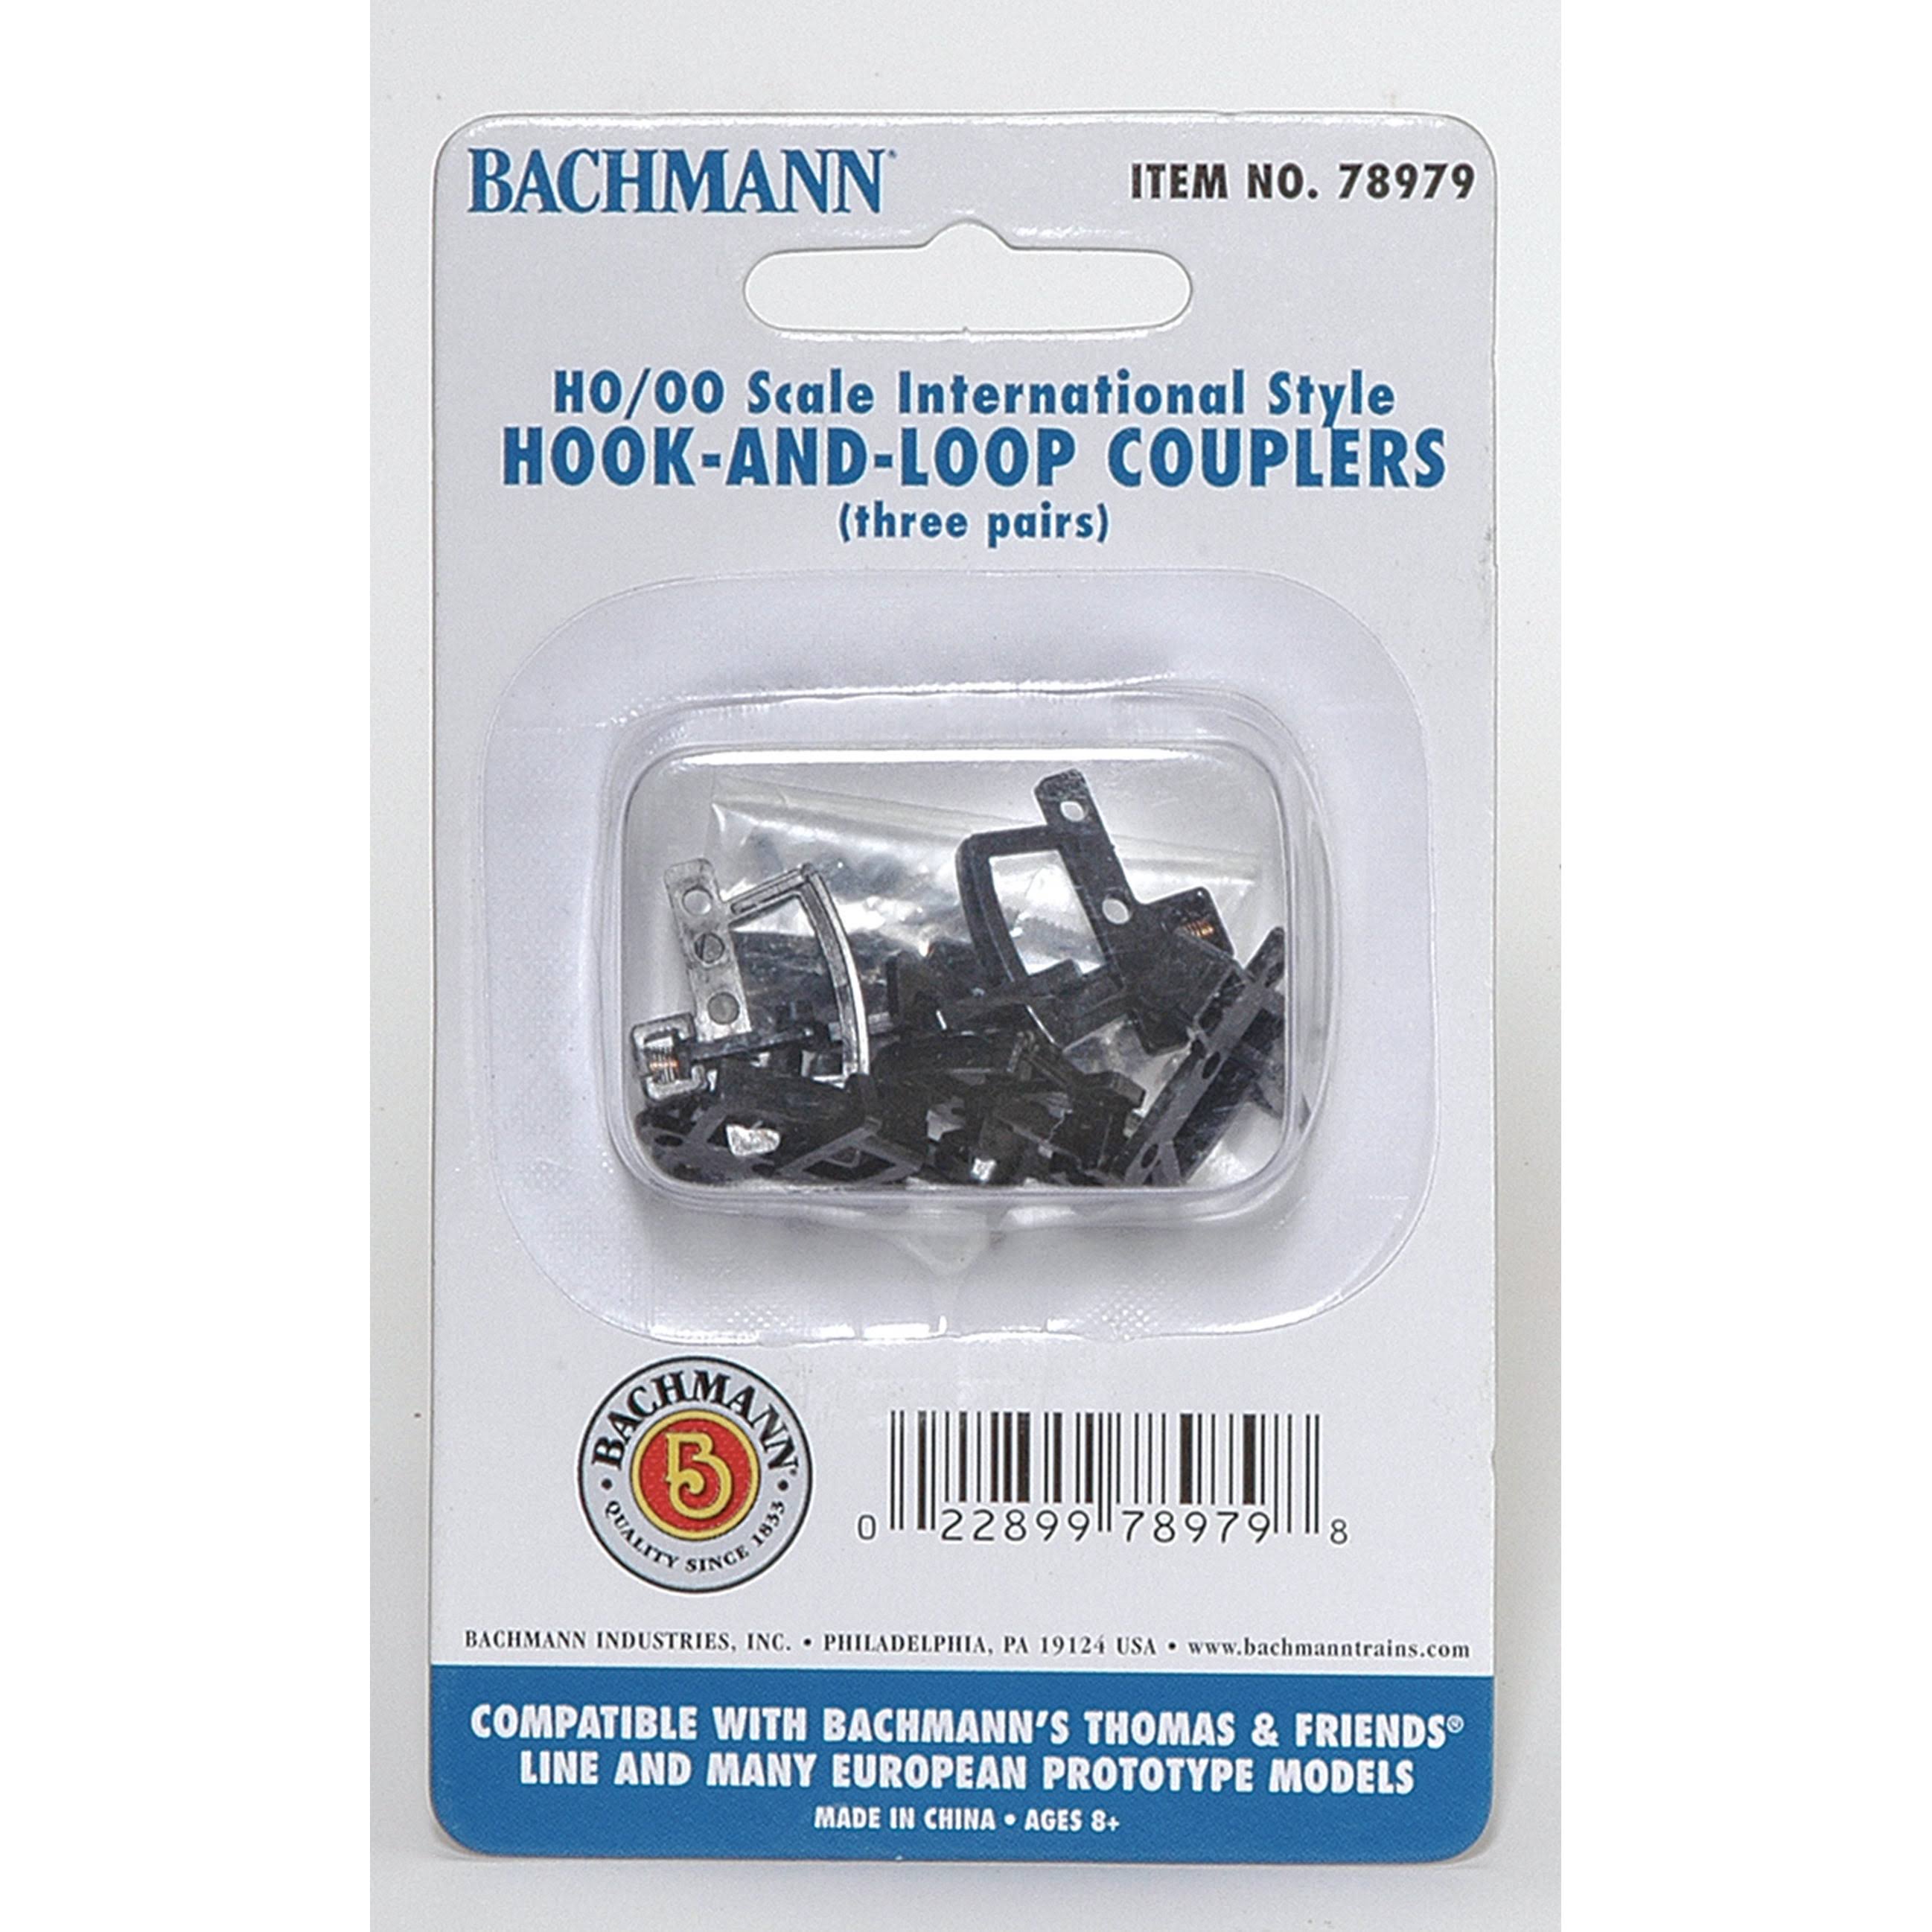 Bachmann Trains - THOMAS & FRIENDS HOOK AND LOOP COUPLERS (3 pair/pack